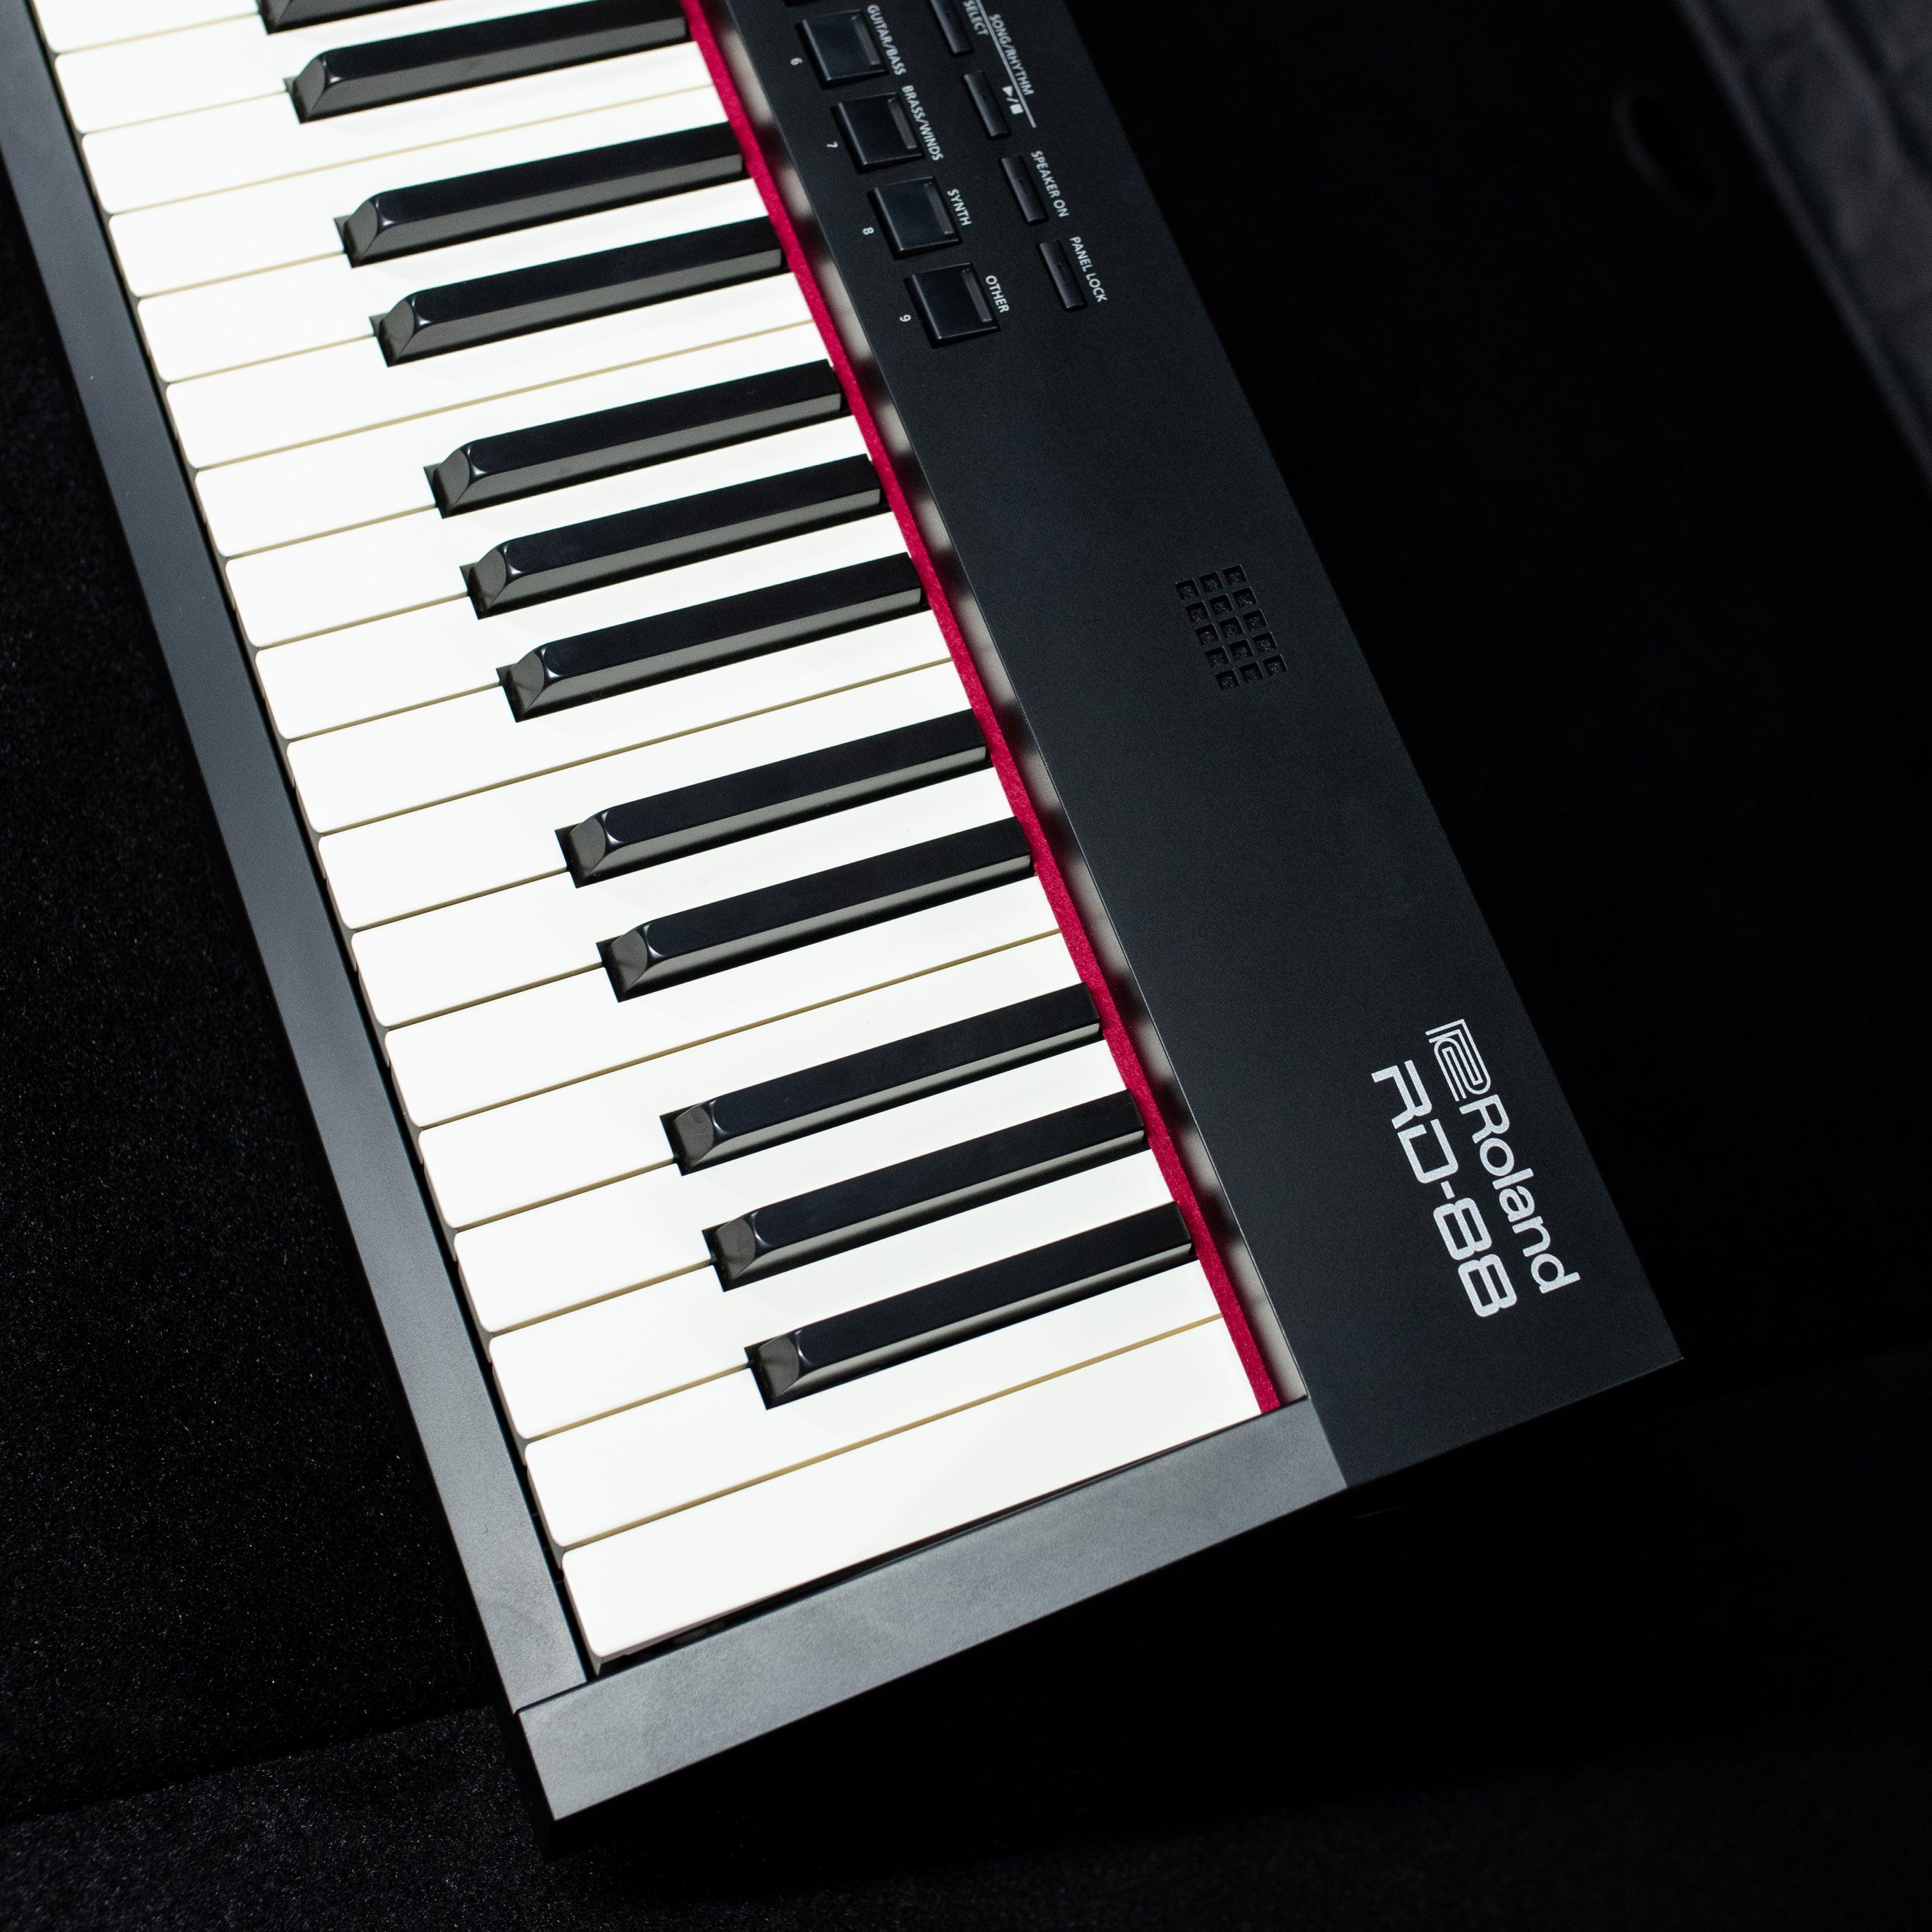 Roland RD-88 Stage Piano - Impulse Music Co.